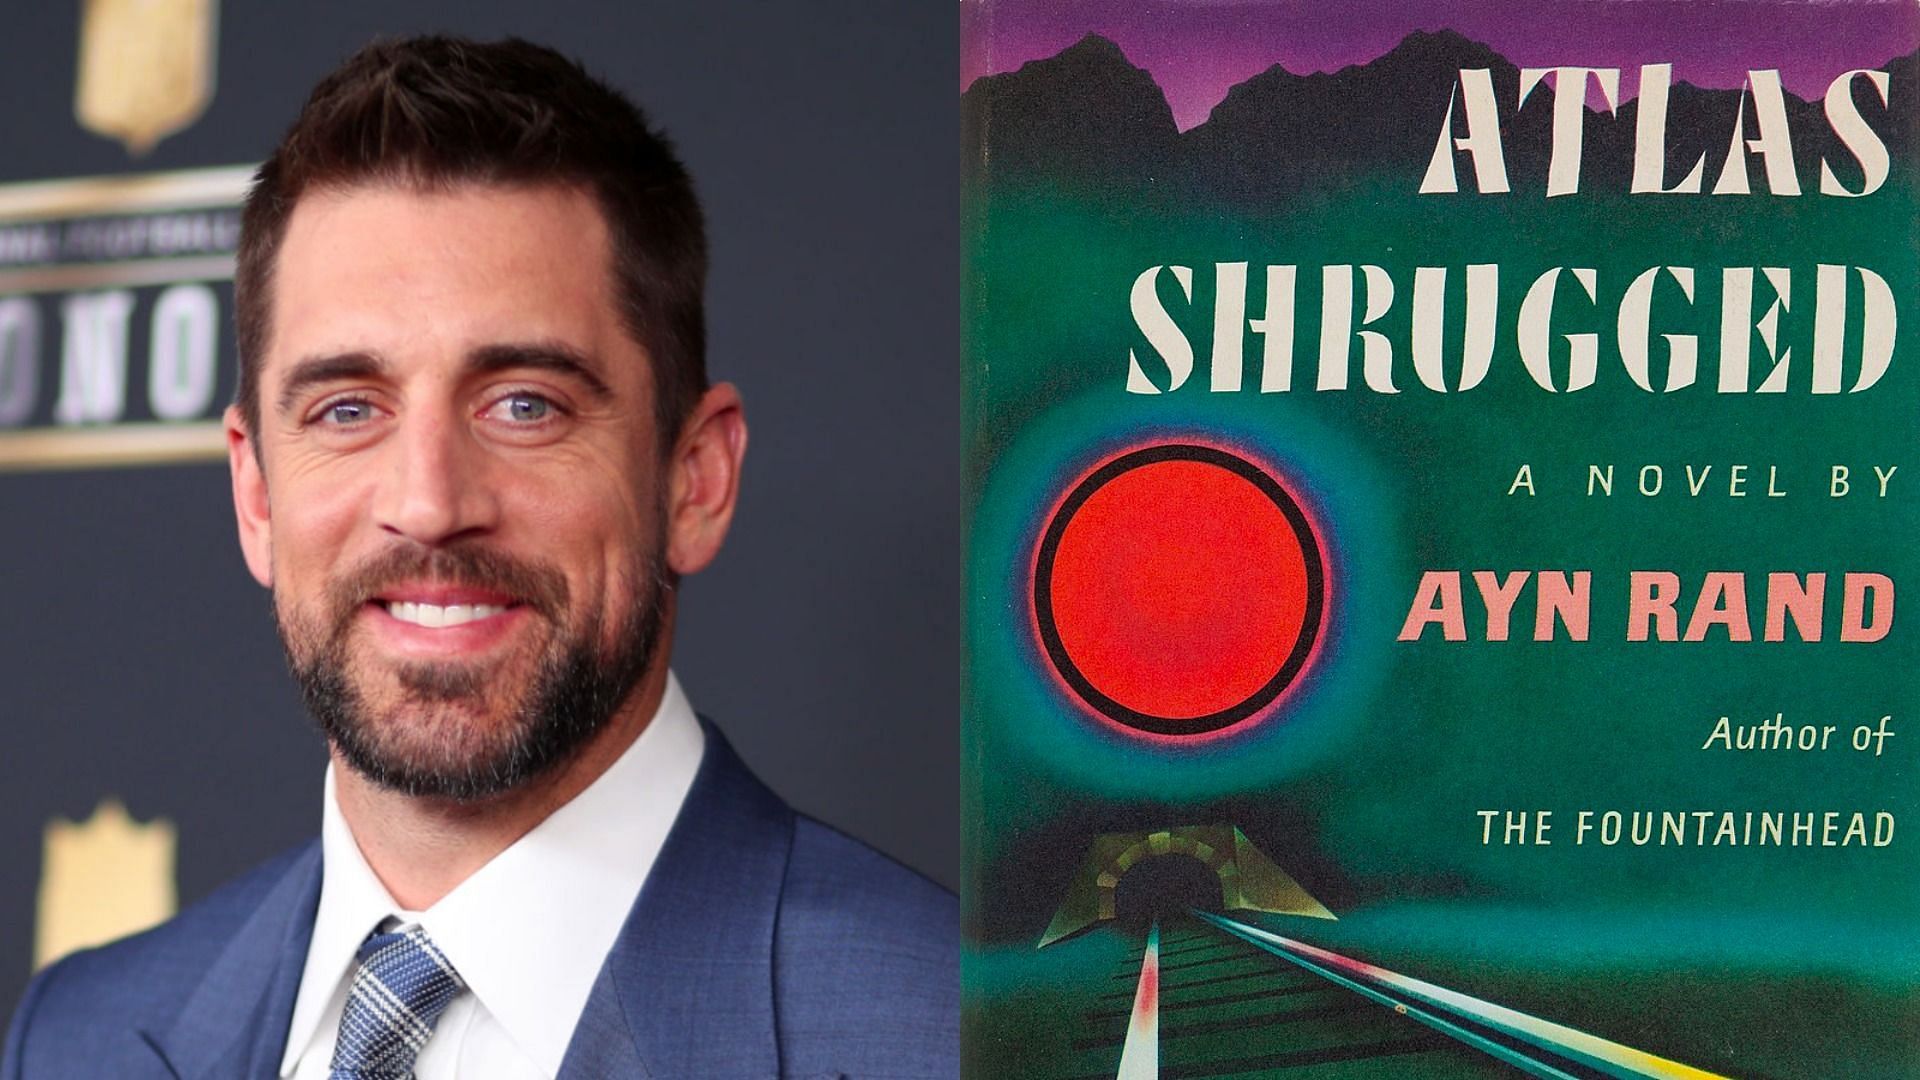 Aaron Rodgers was mocked online for reading Ayn Rand&#039;s &#039;Atlas Shrugged&#039; (Image via Christopher Polk/Getty Images and Atlas Shrugged)